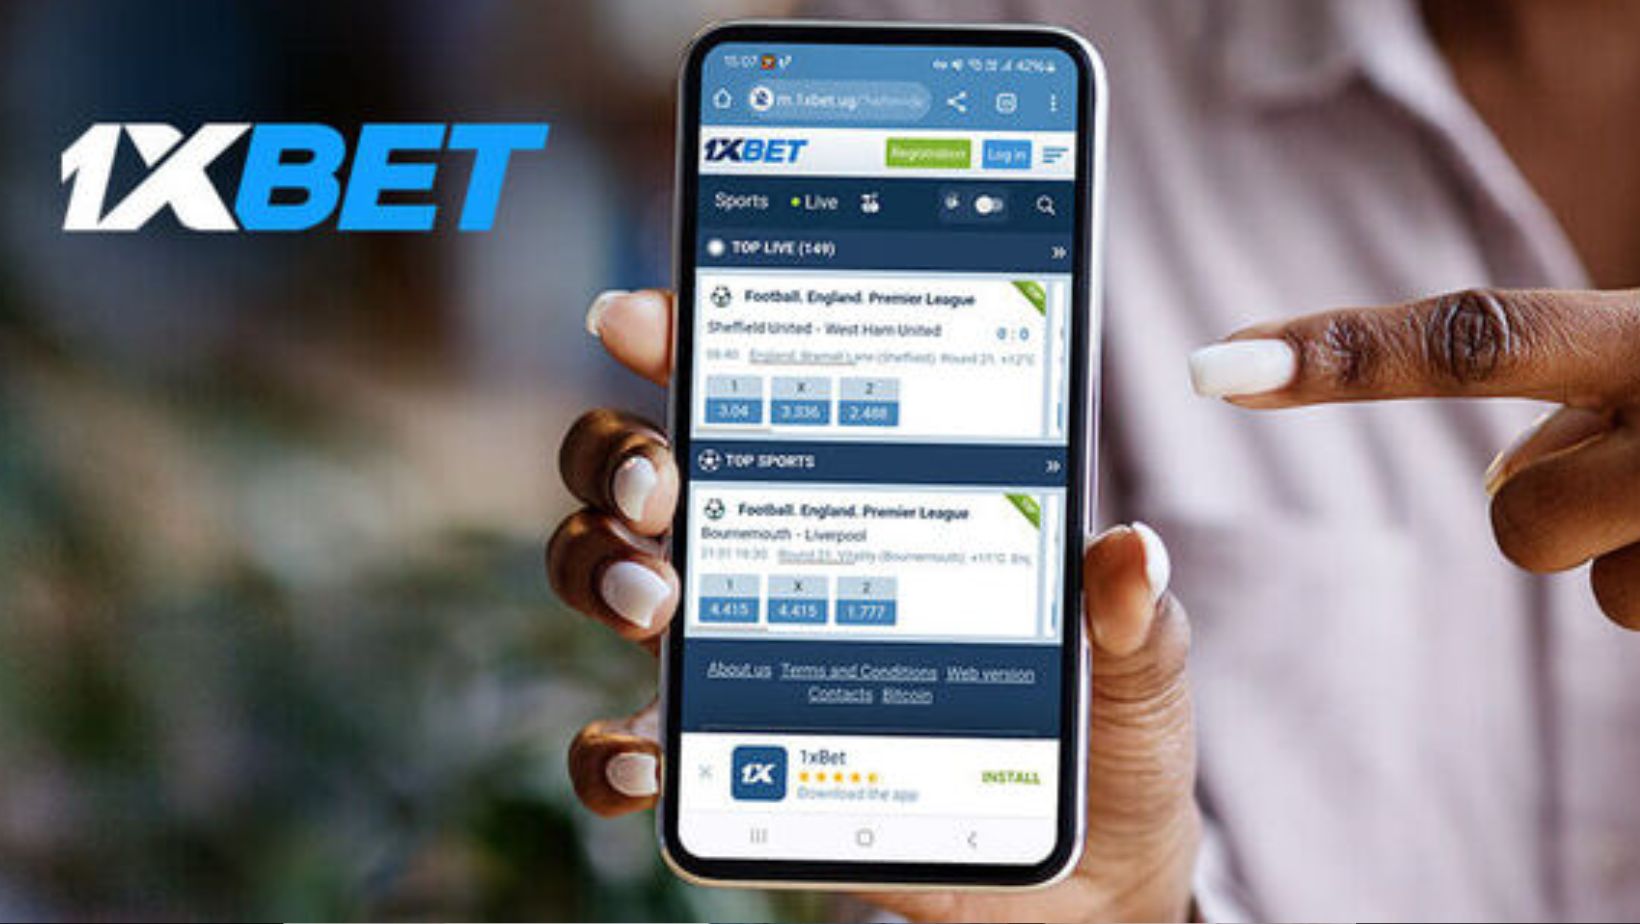 Why Should You Use 1xBet Mobile?